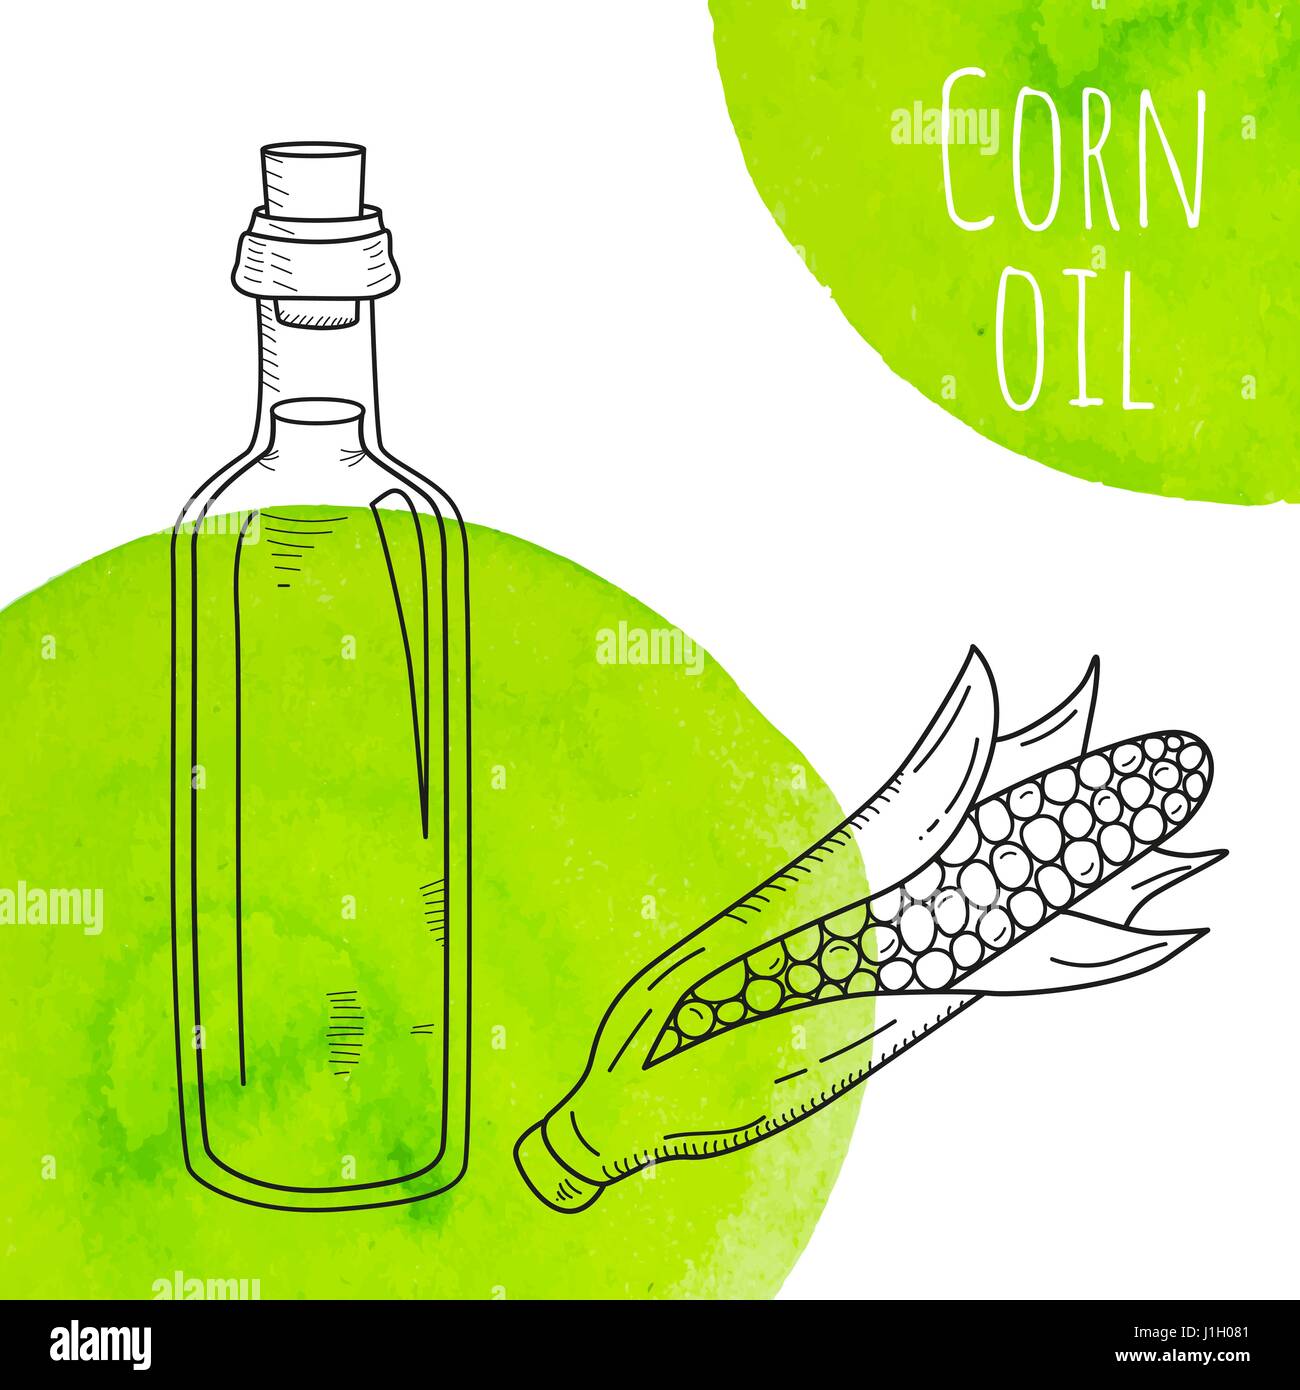 Hand drawn corn oil bottle with green watercolor spots Stock Vector